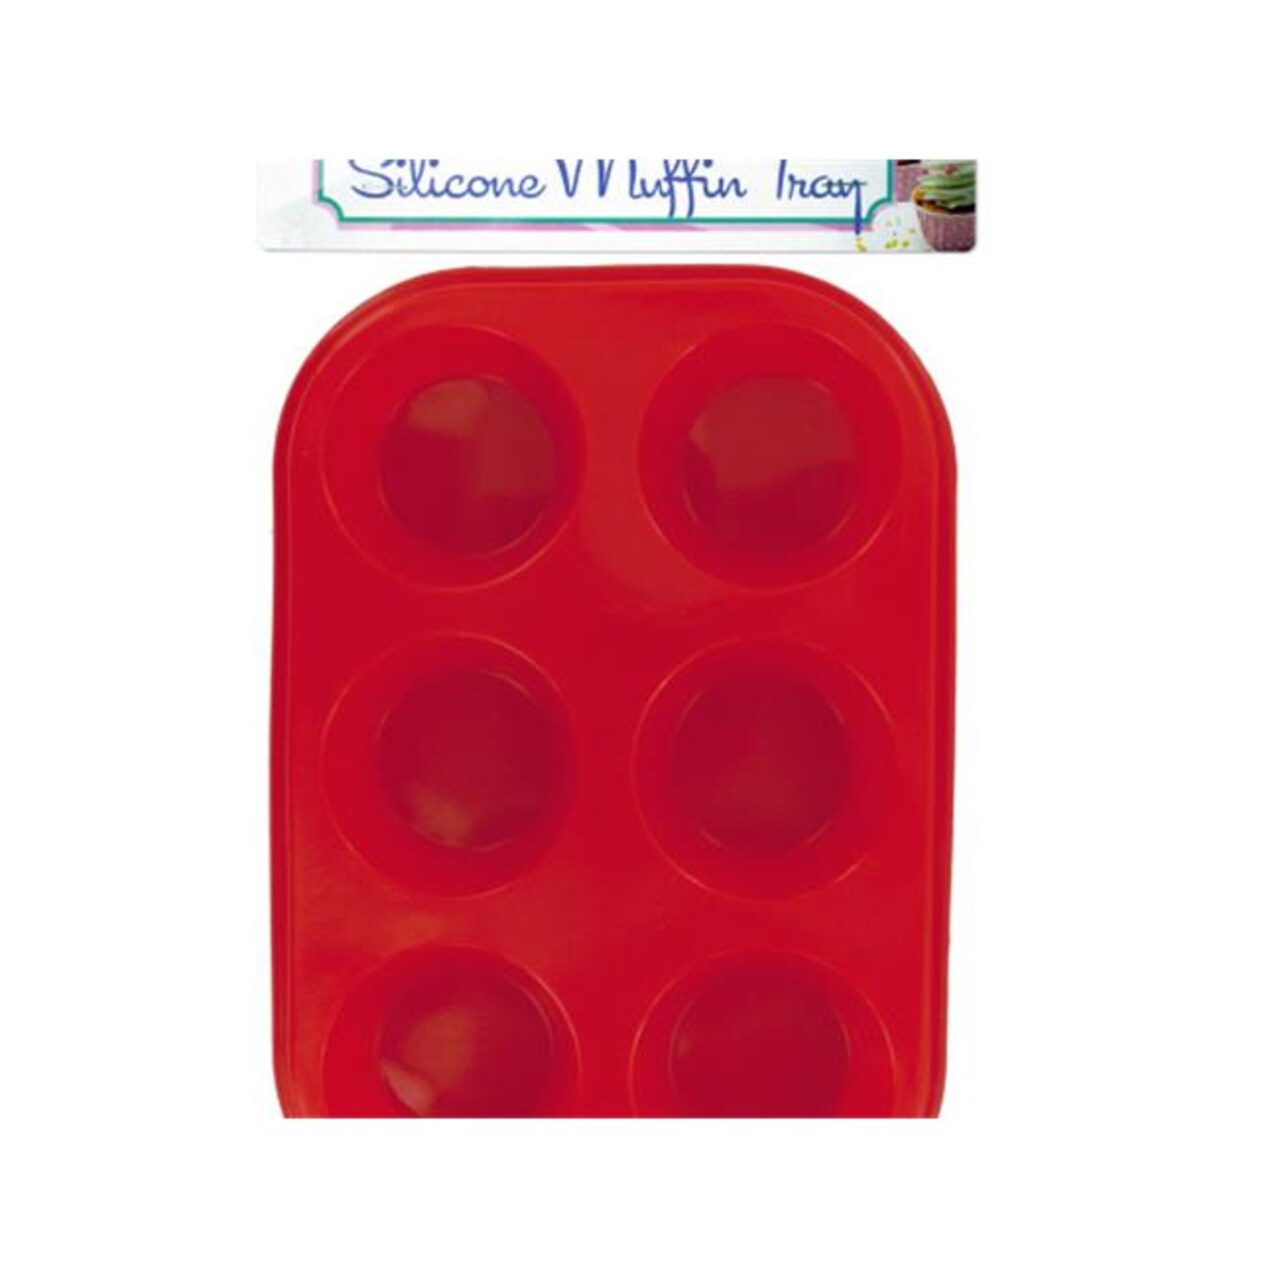 Bulk Buys OL463-6 Silicone Muffin Tray - 6 Piece -Pack of 6